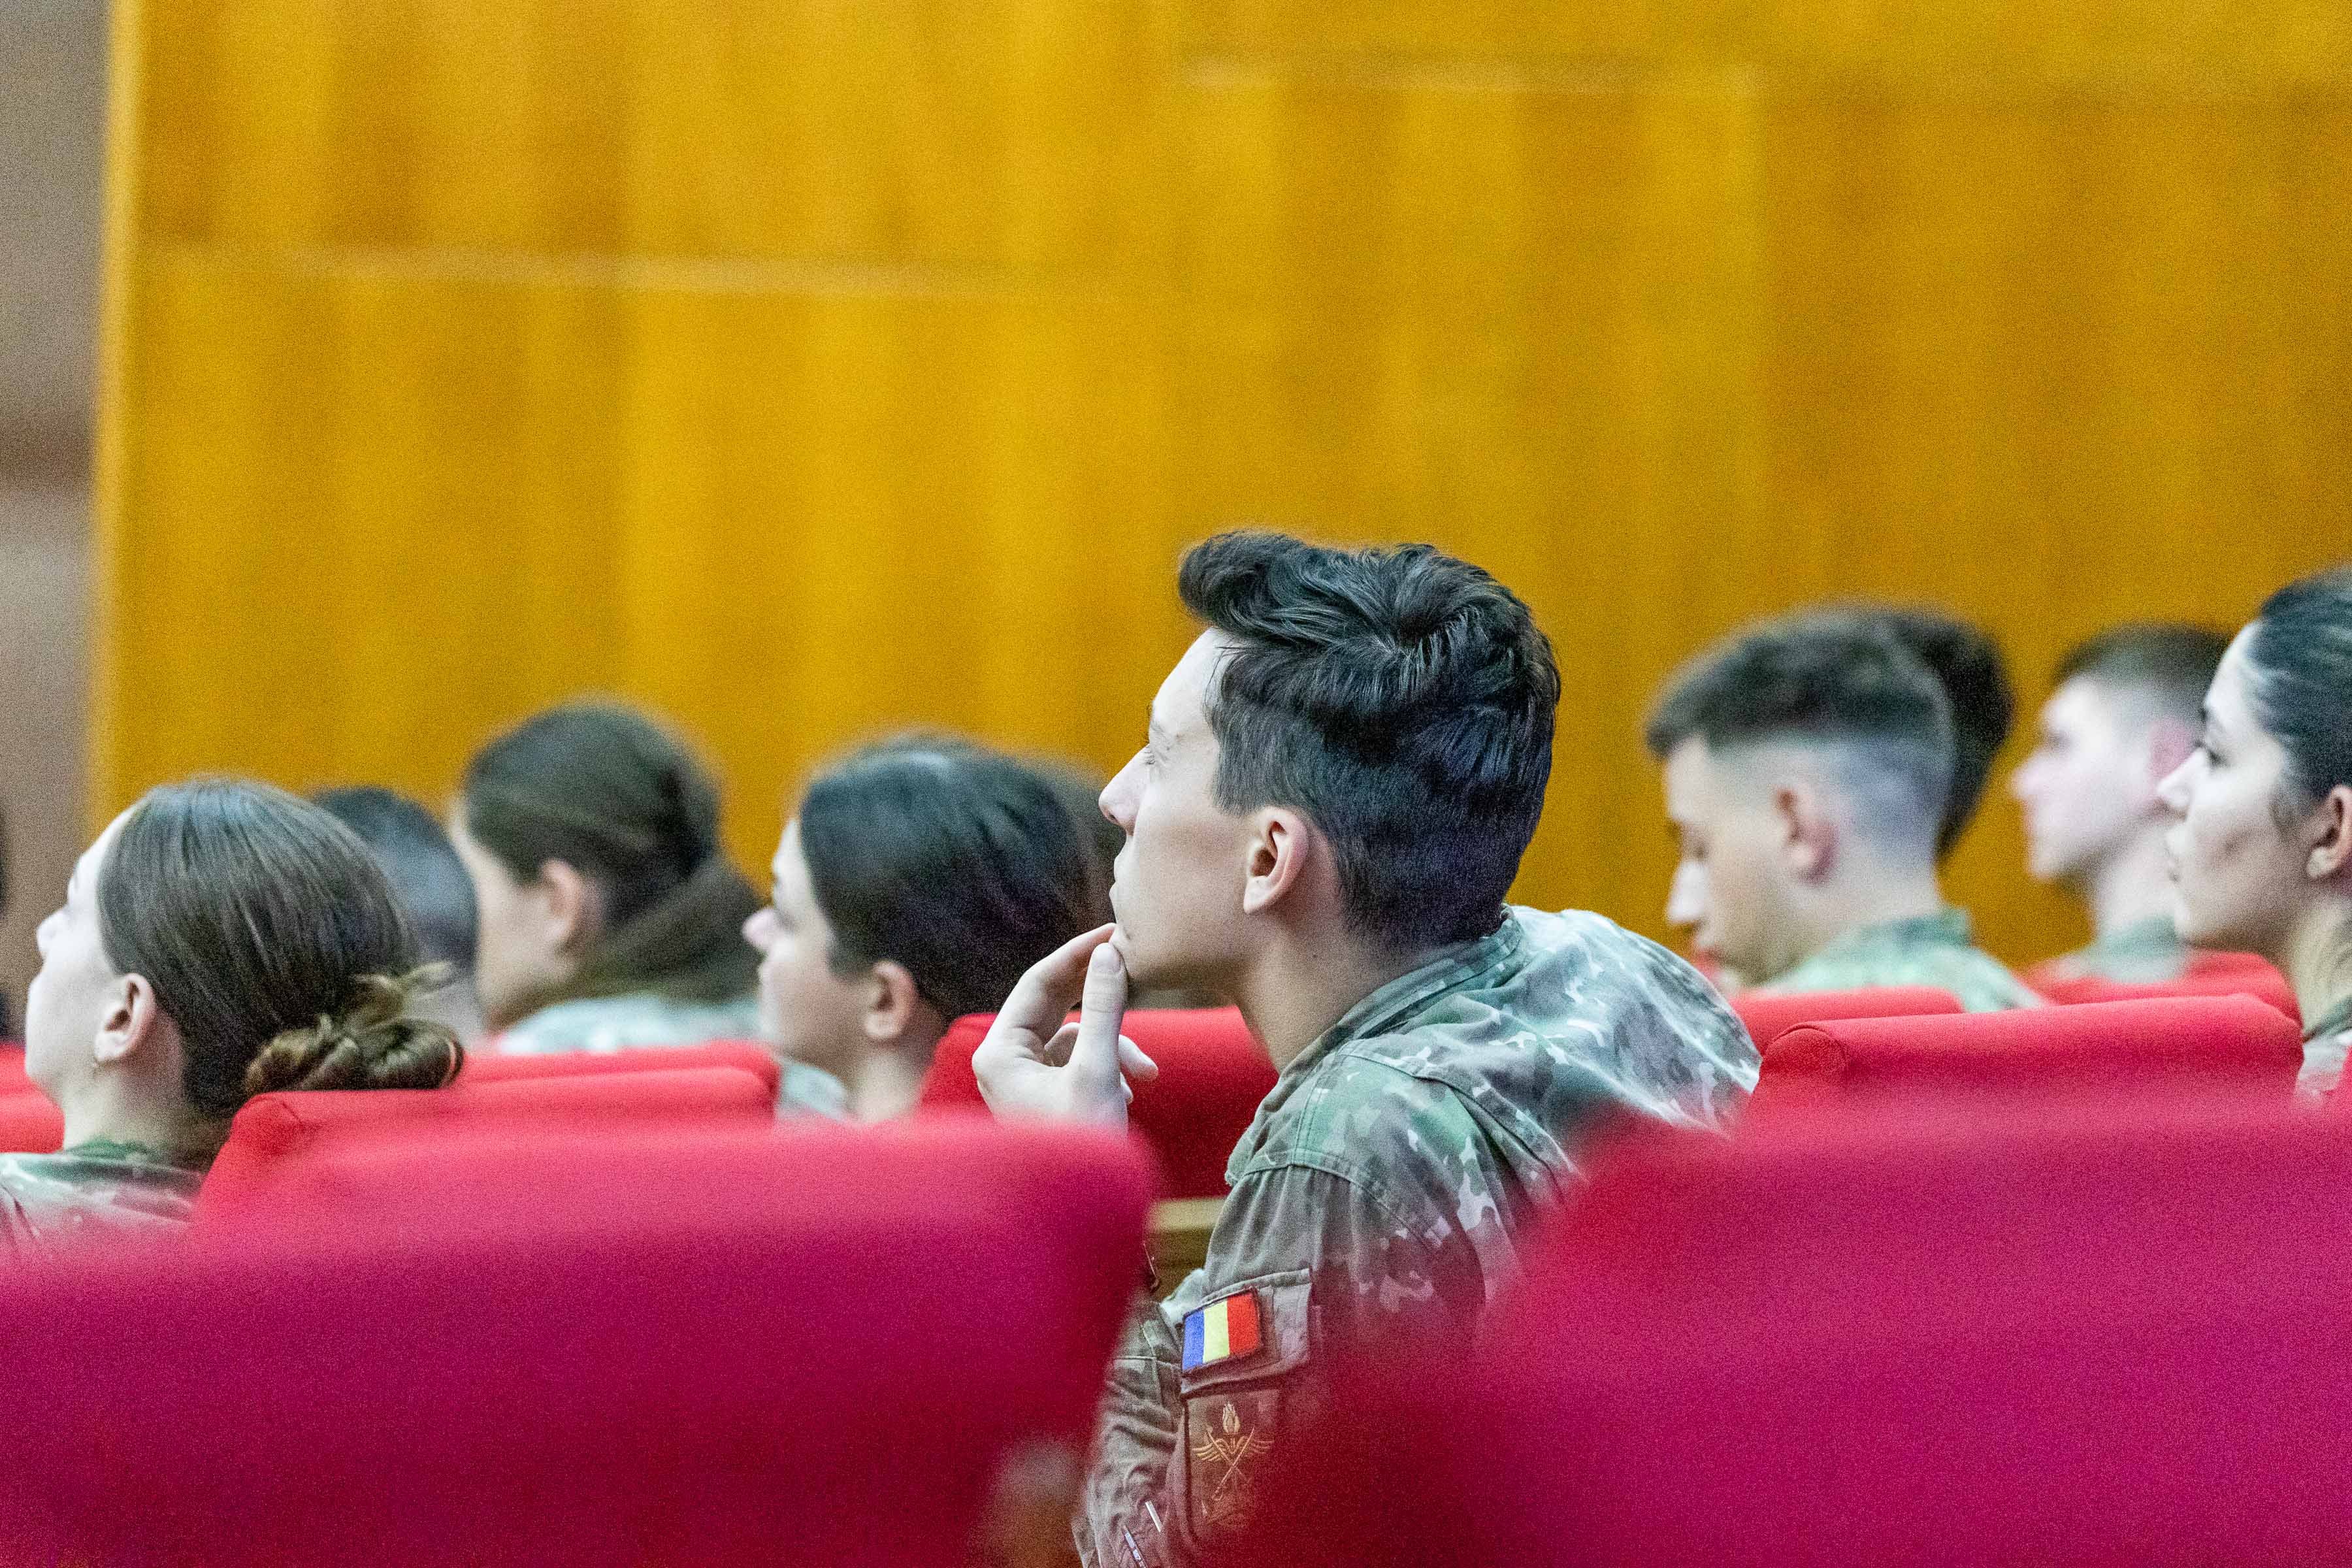 Personnel in the audience of lecture hall.